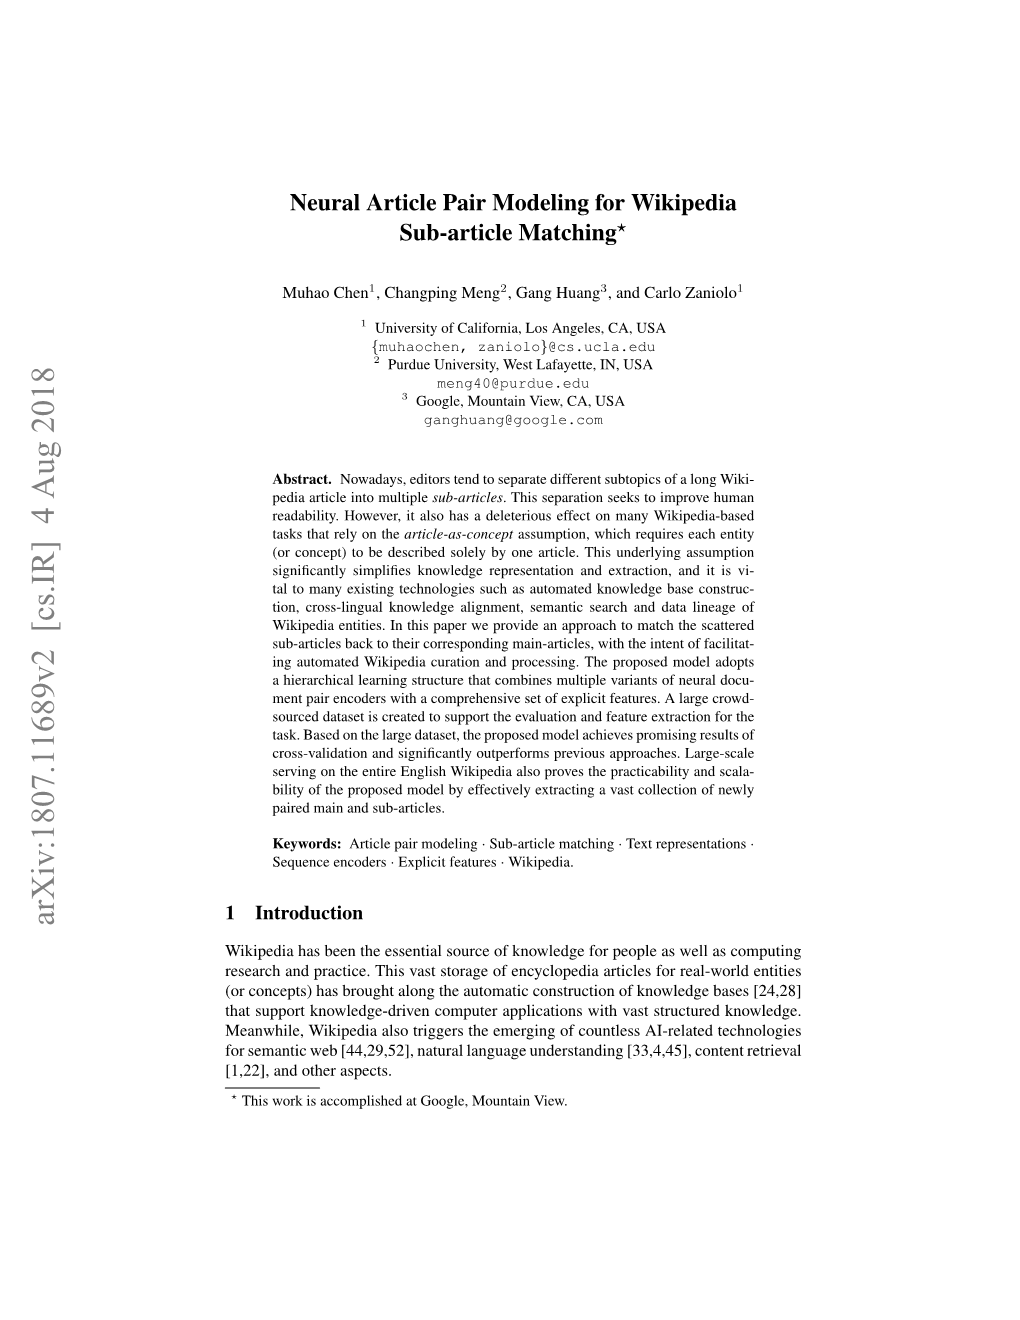 Neural Article Pair Modeling for Wikipedia Sub-Article Matching?